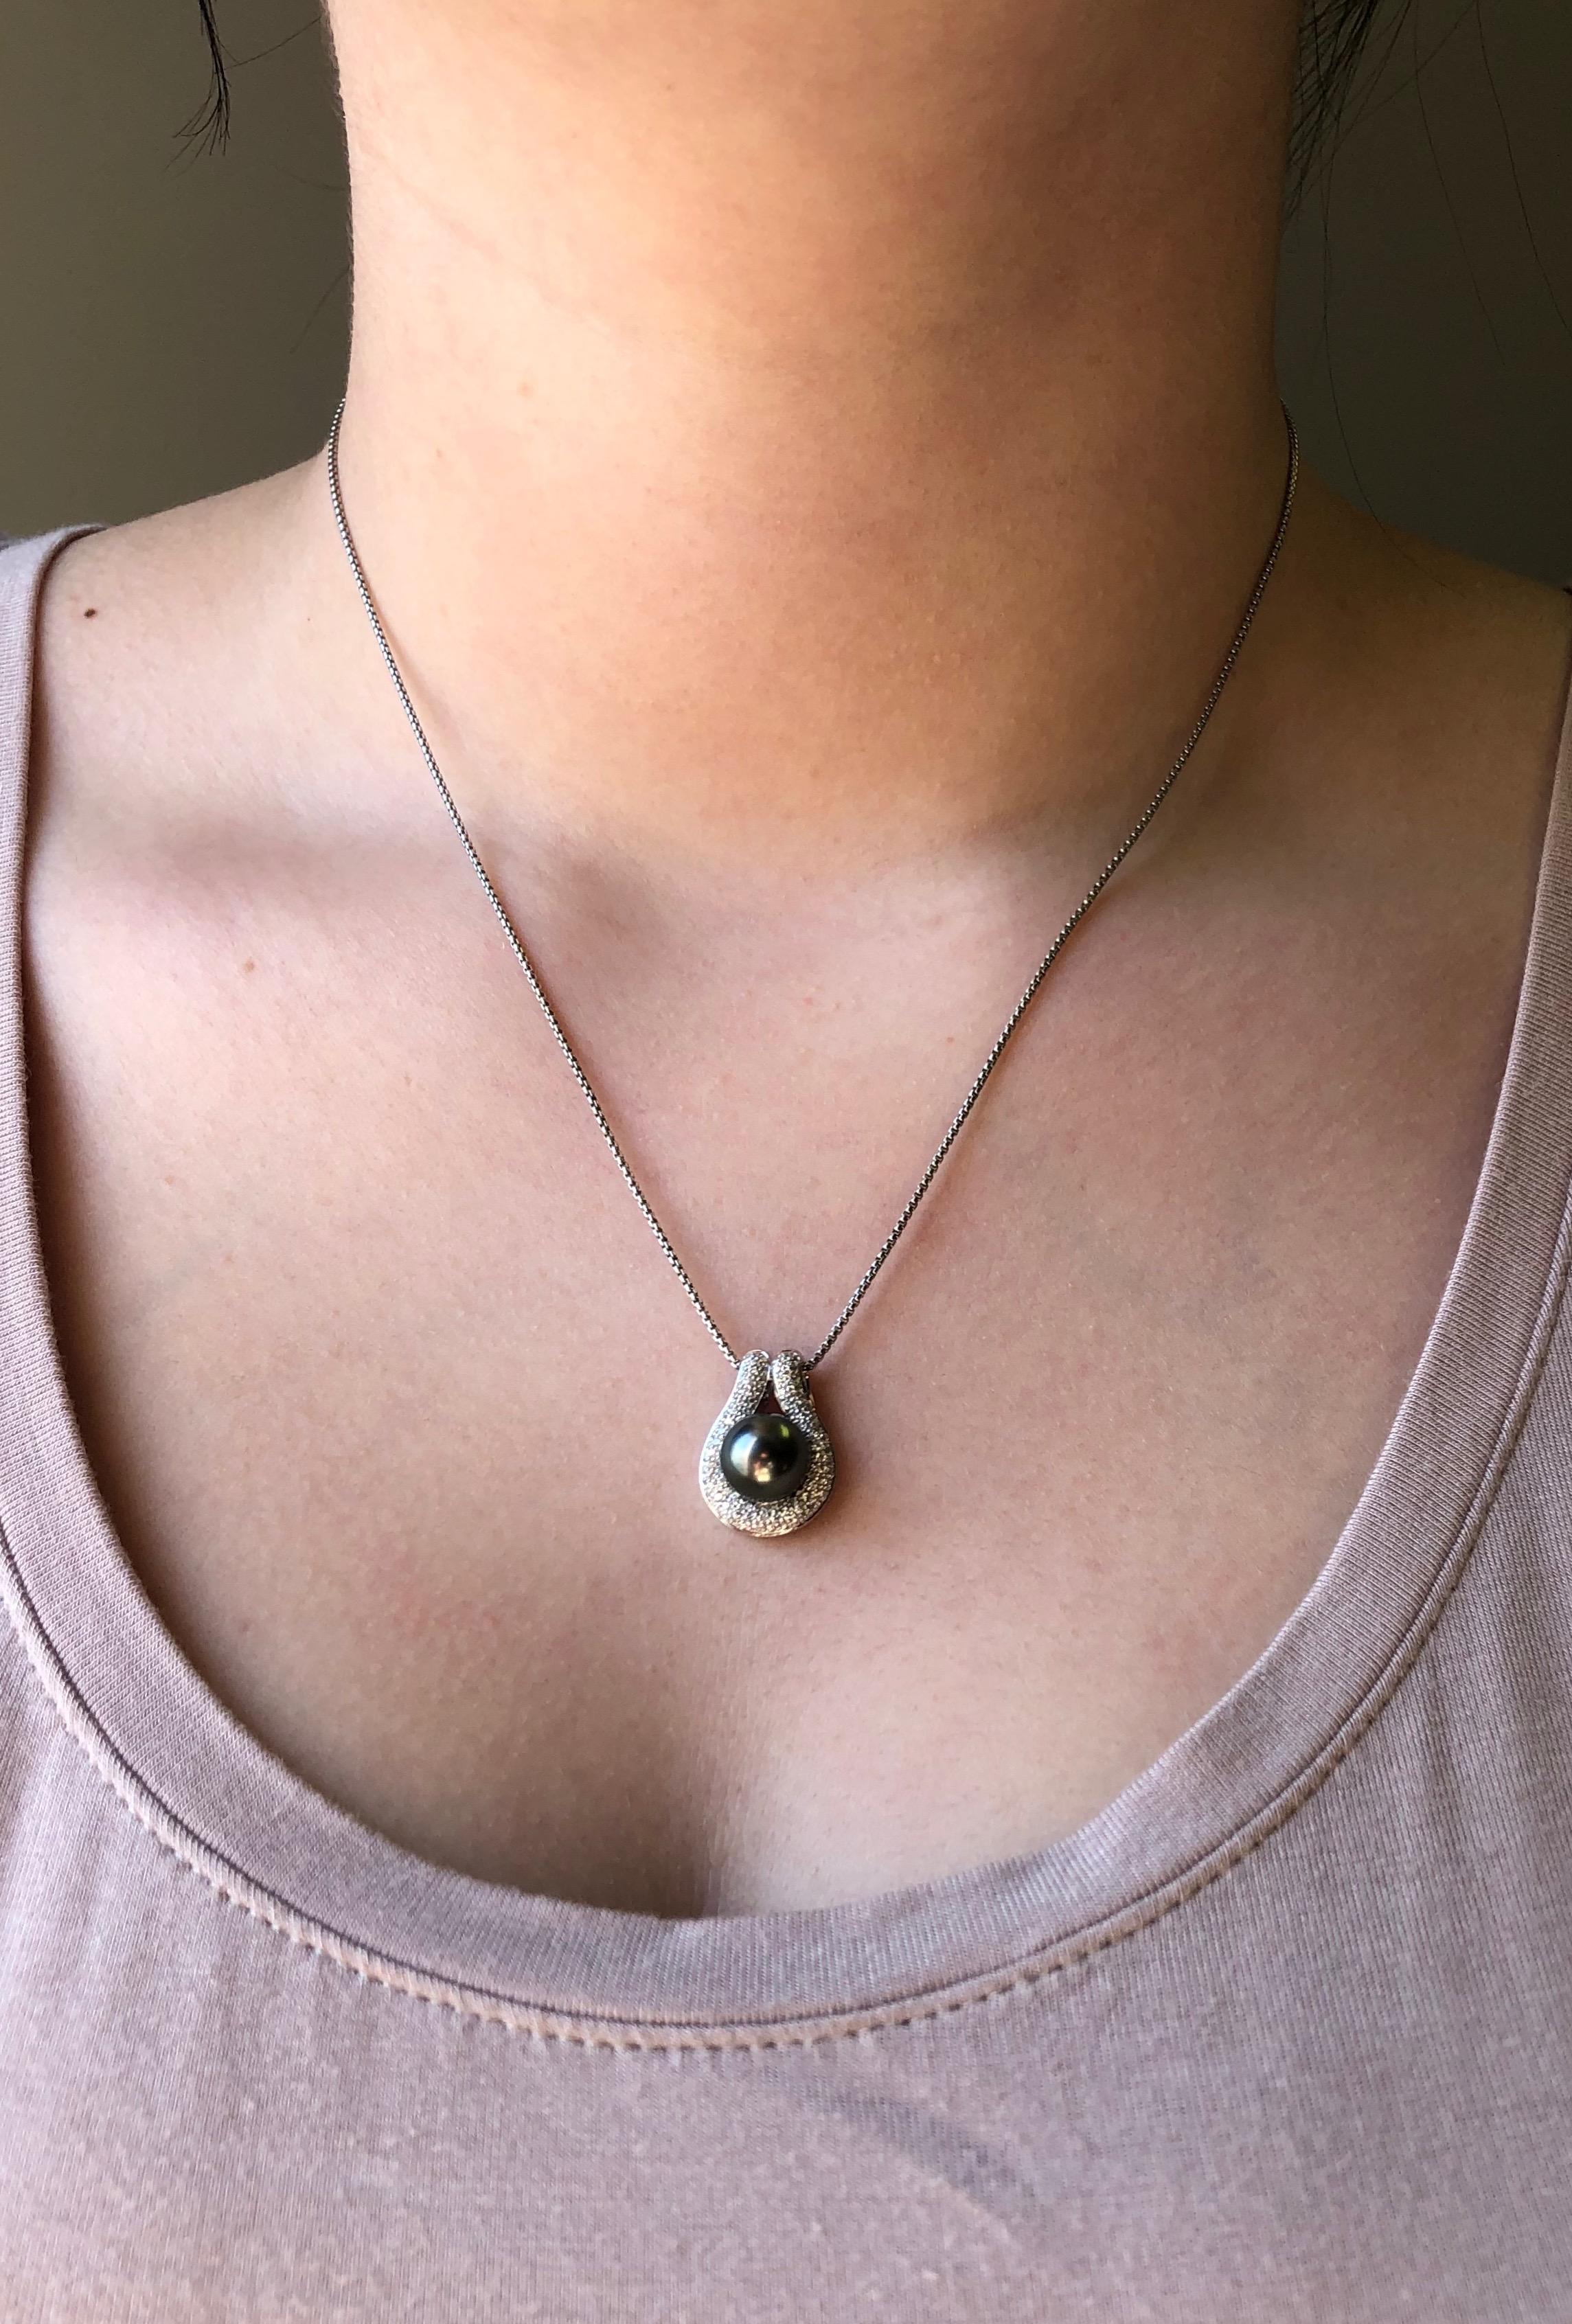 Round Cut Black Tahitian Pearl and Diamond Pendant Necklace